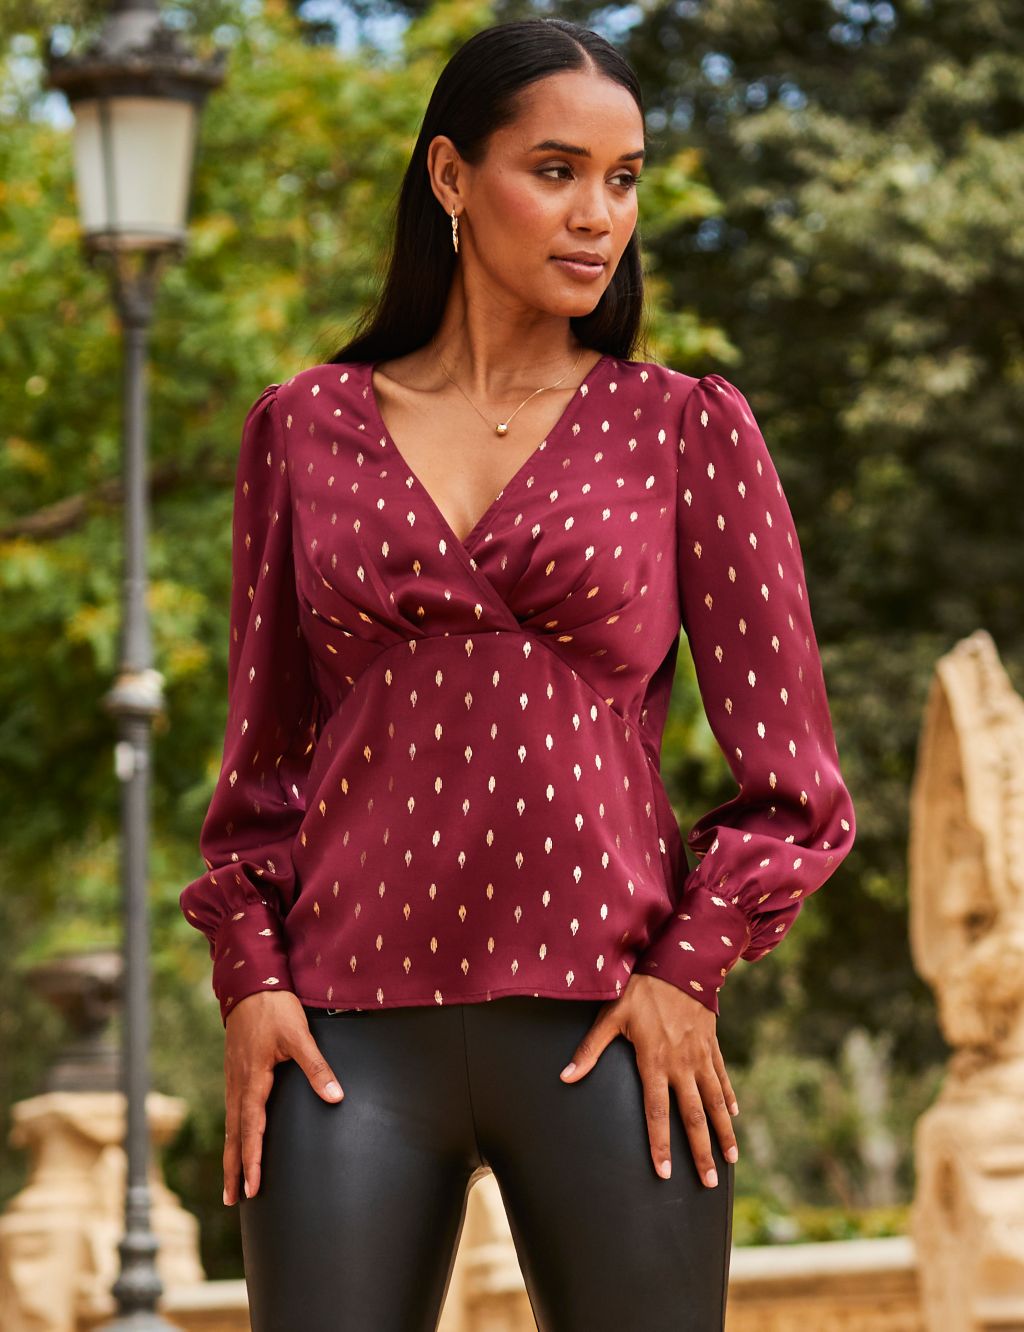 Women's Red Shirts & Blouses: Casual & Formal